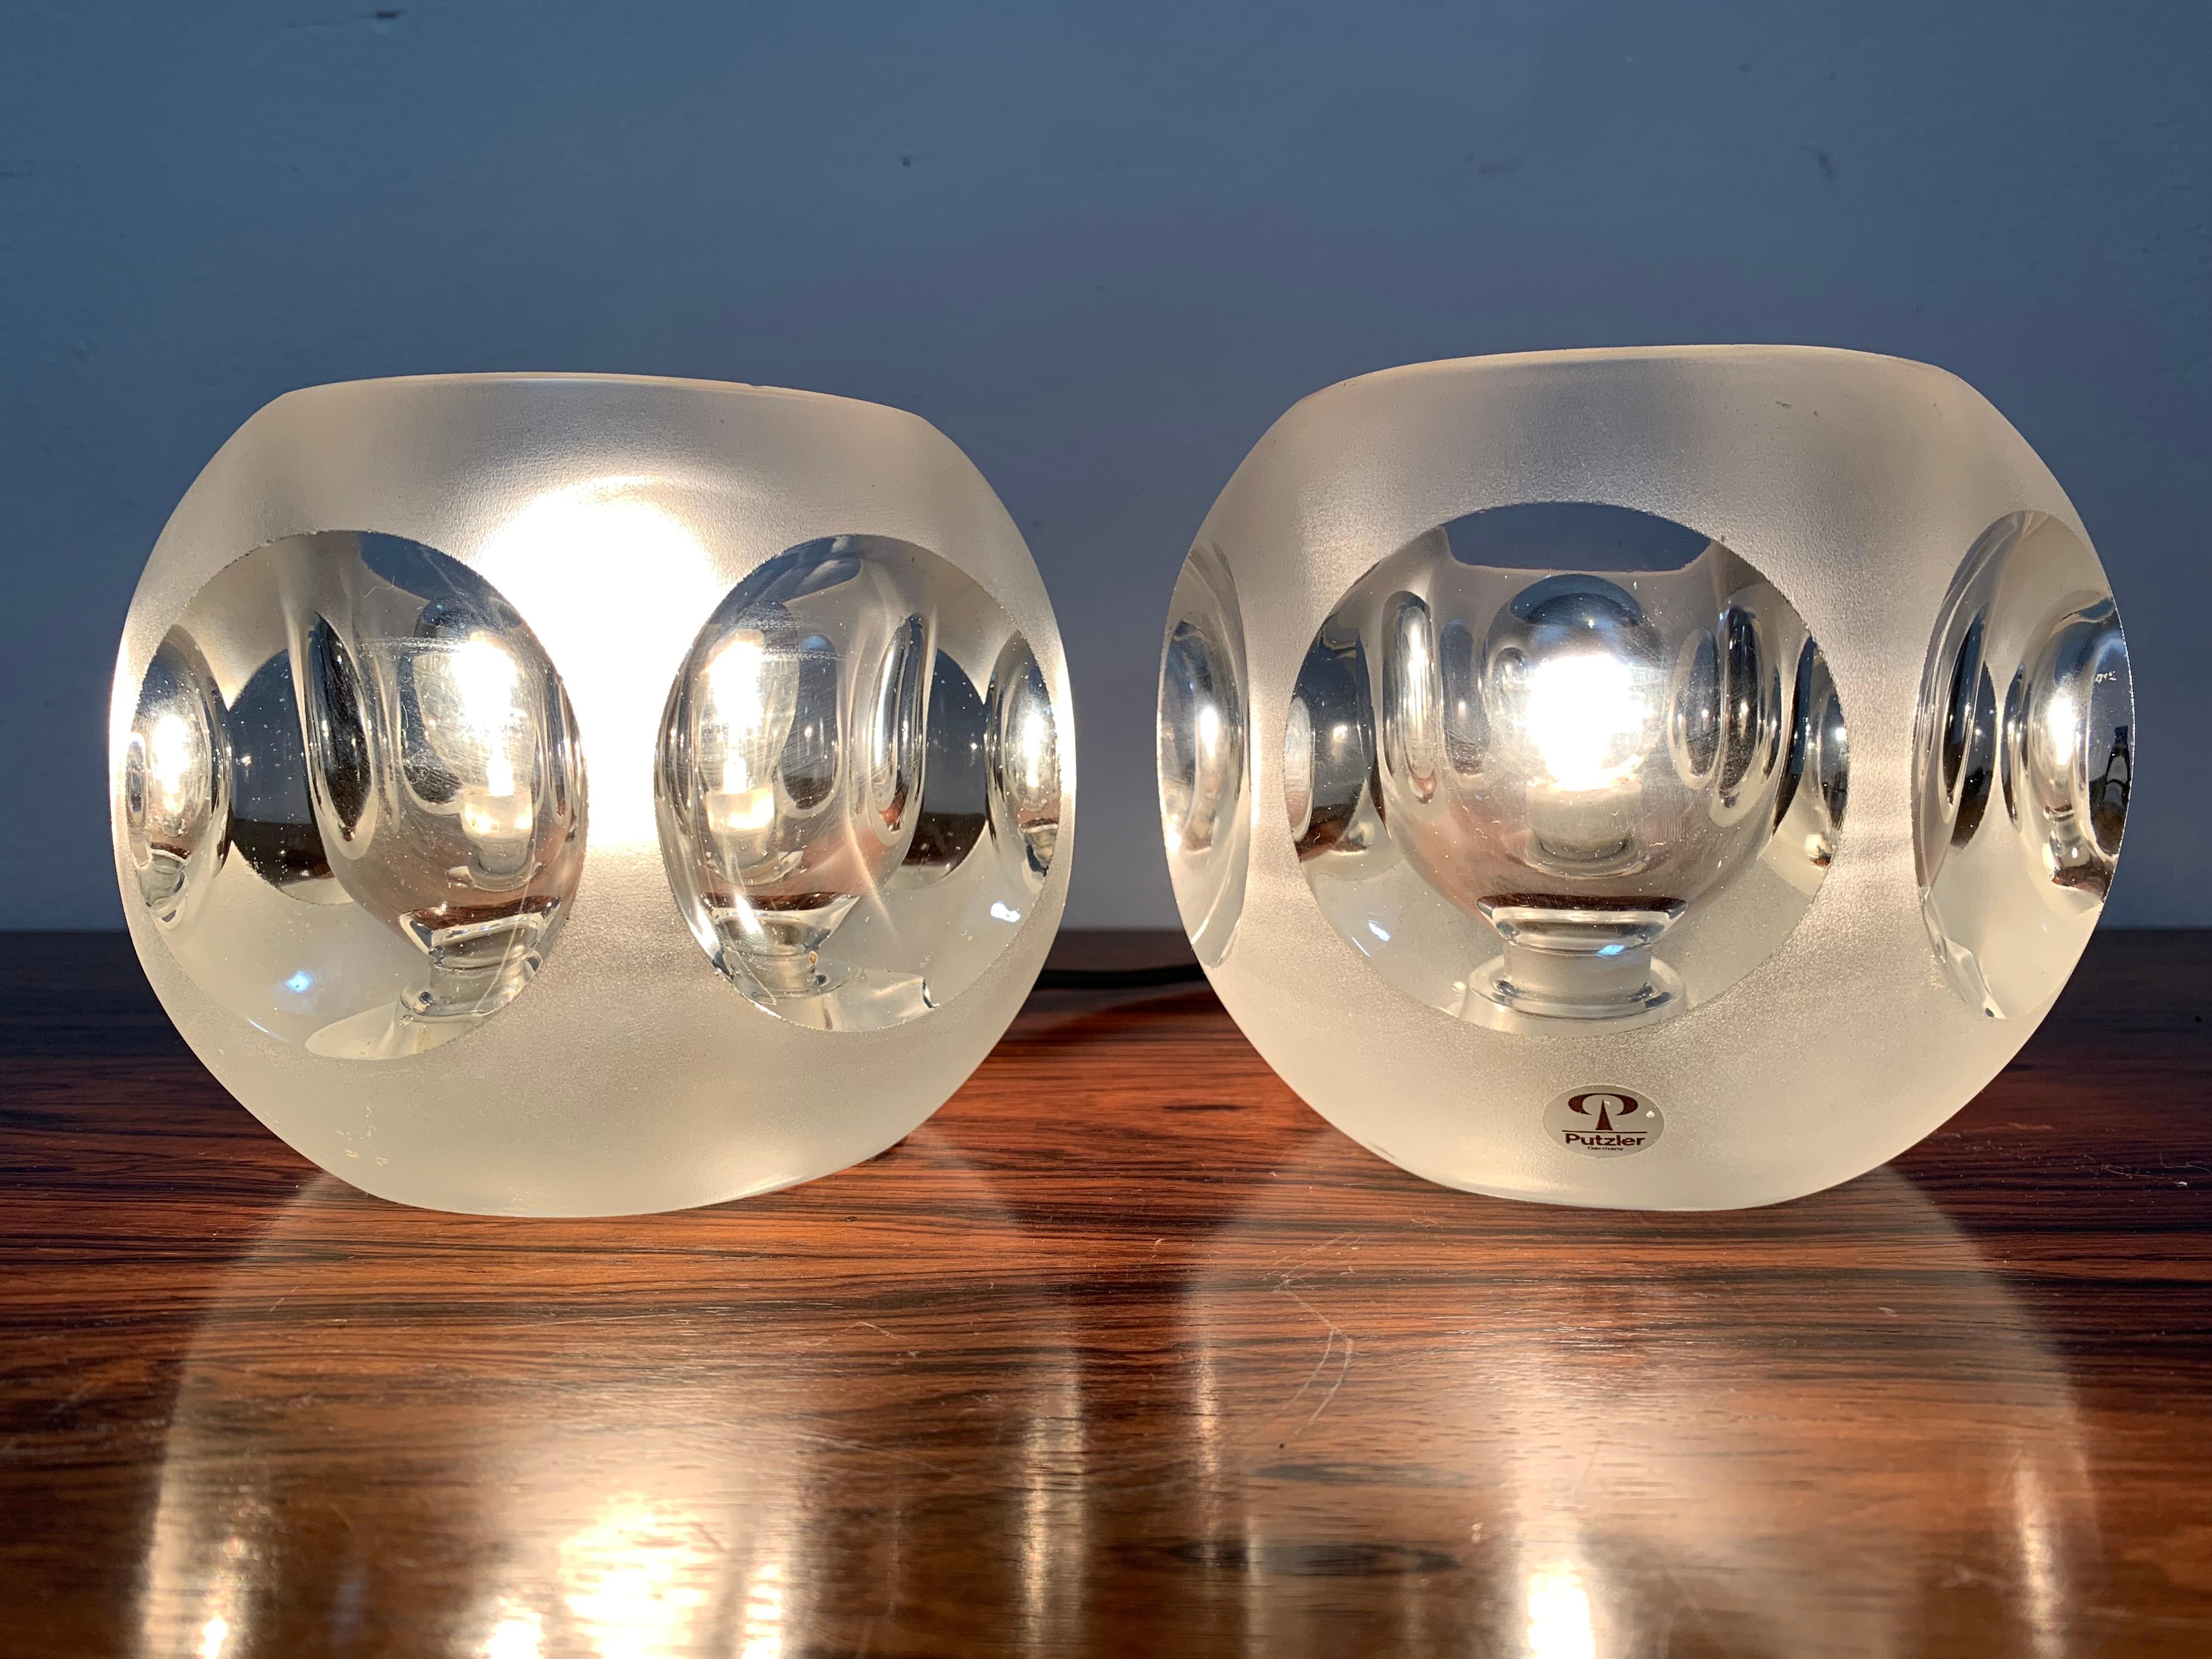 Pair of 1970s Peill and Putzler frosted and clear glass round ice cube table lights. The lights have four convex indentations which magnifying and reflect the light. An on/off switch sits on the black flex. One light still feature the manufacturers